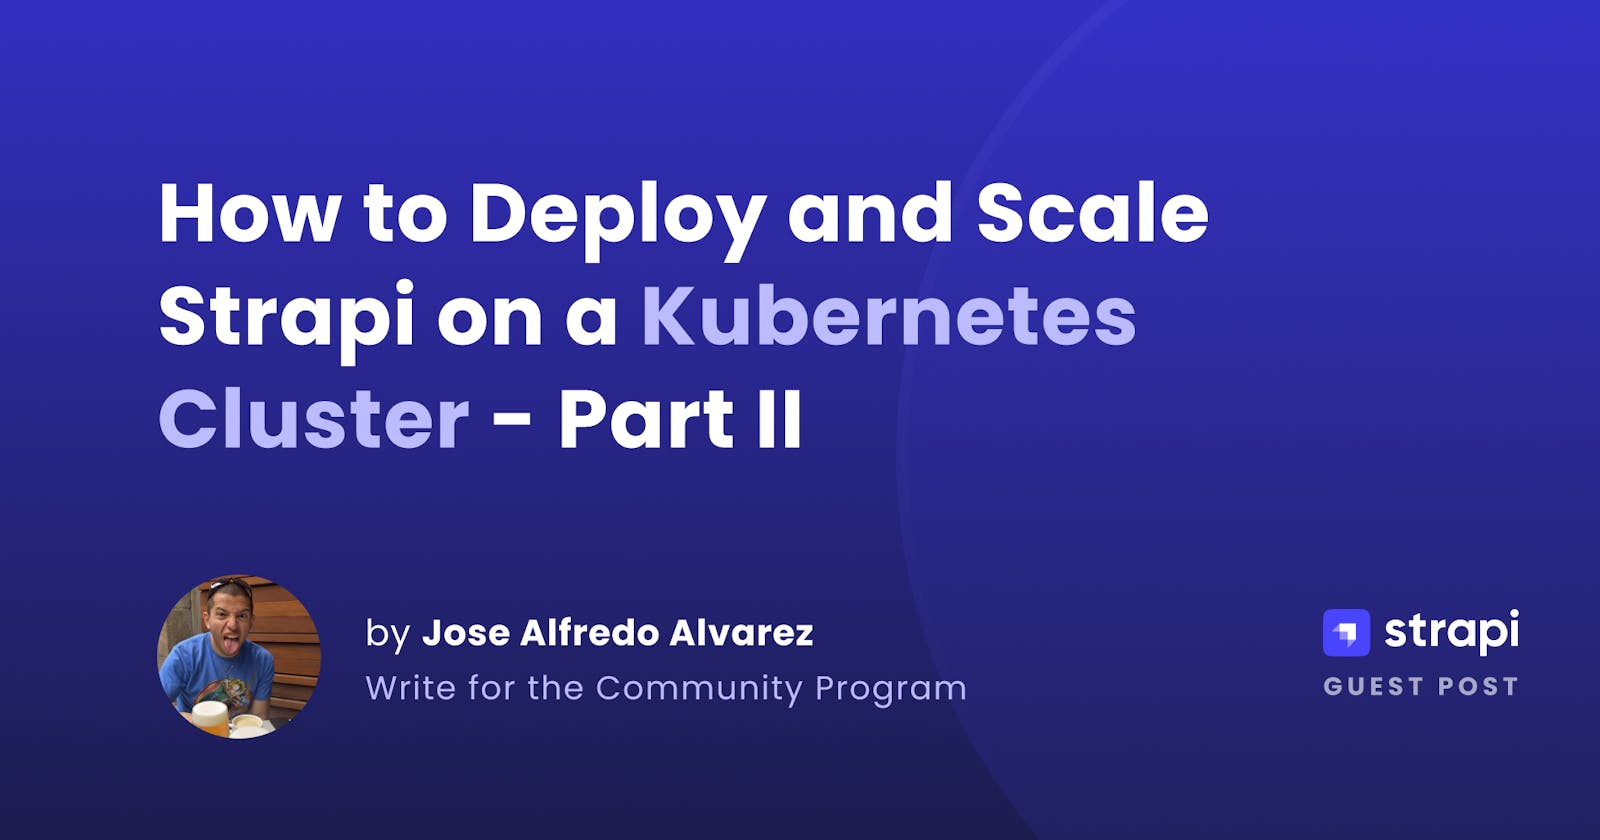 How to Deploy and Scale Strapi on a Kubernetes Cluster 2/2